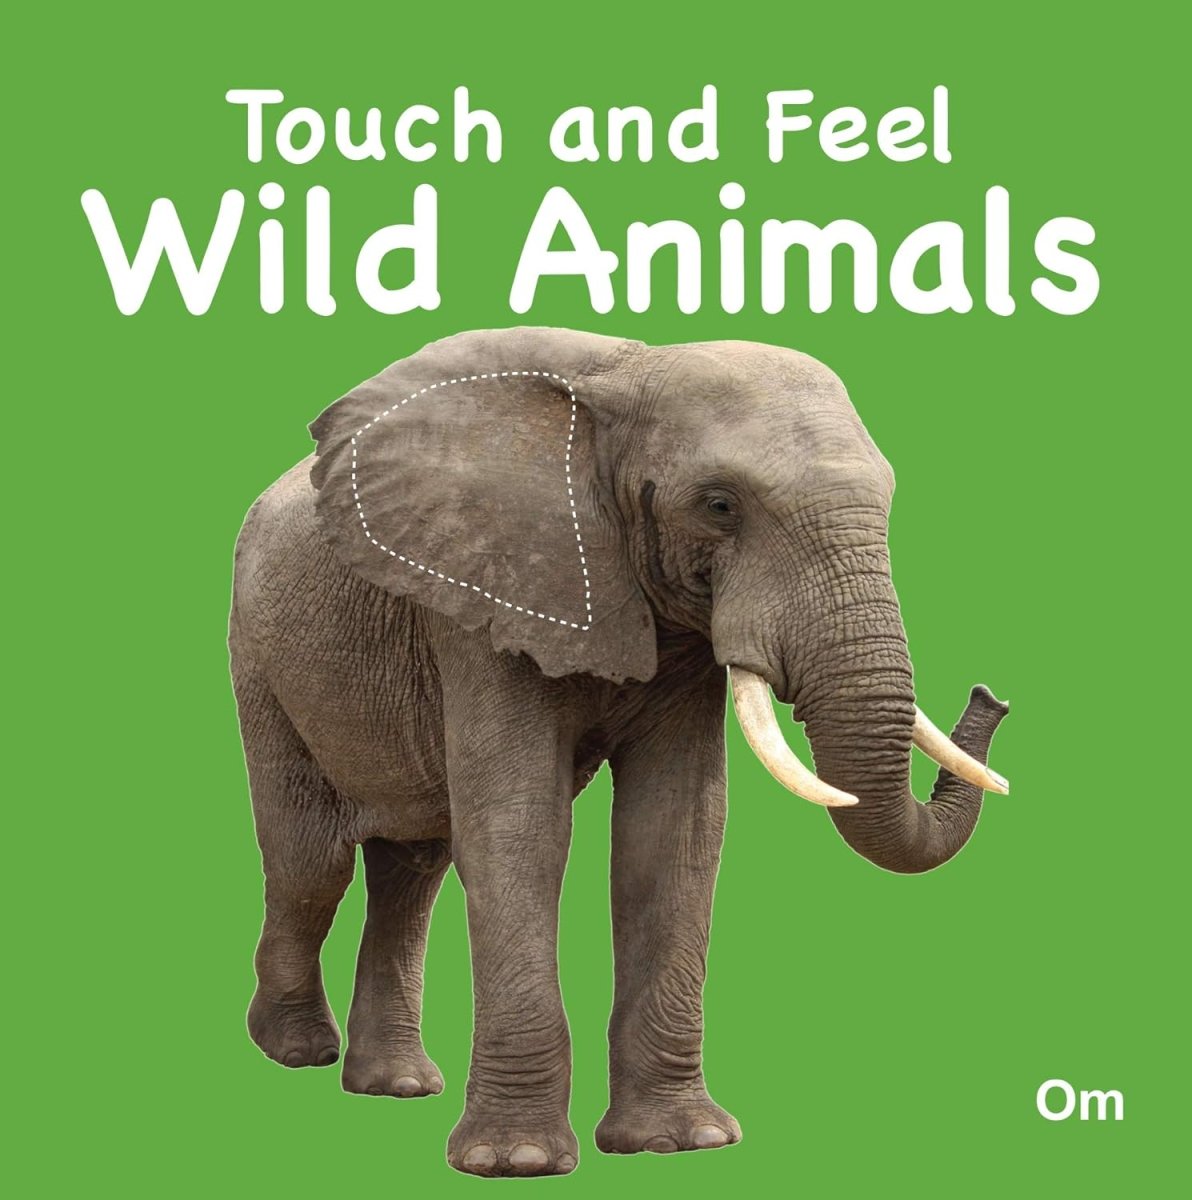 Om Books International Board Book-Touch and Feel: Wild Animals (Touch & Feel) - 9789385273049